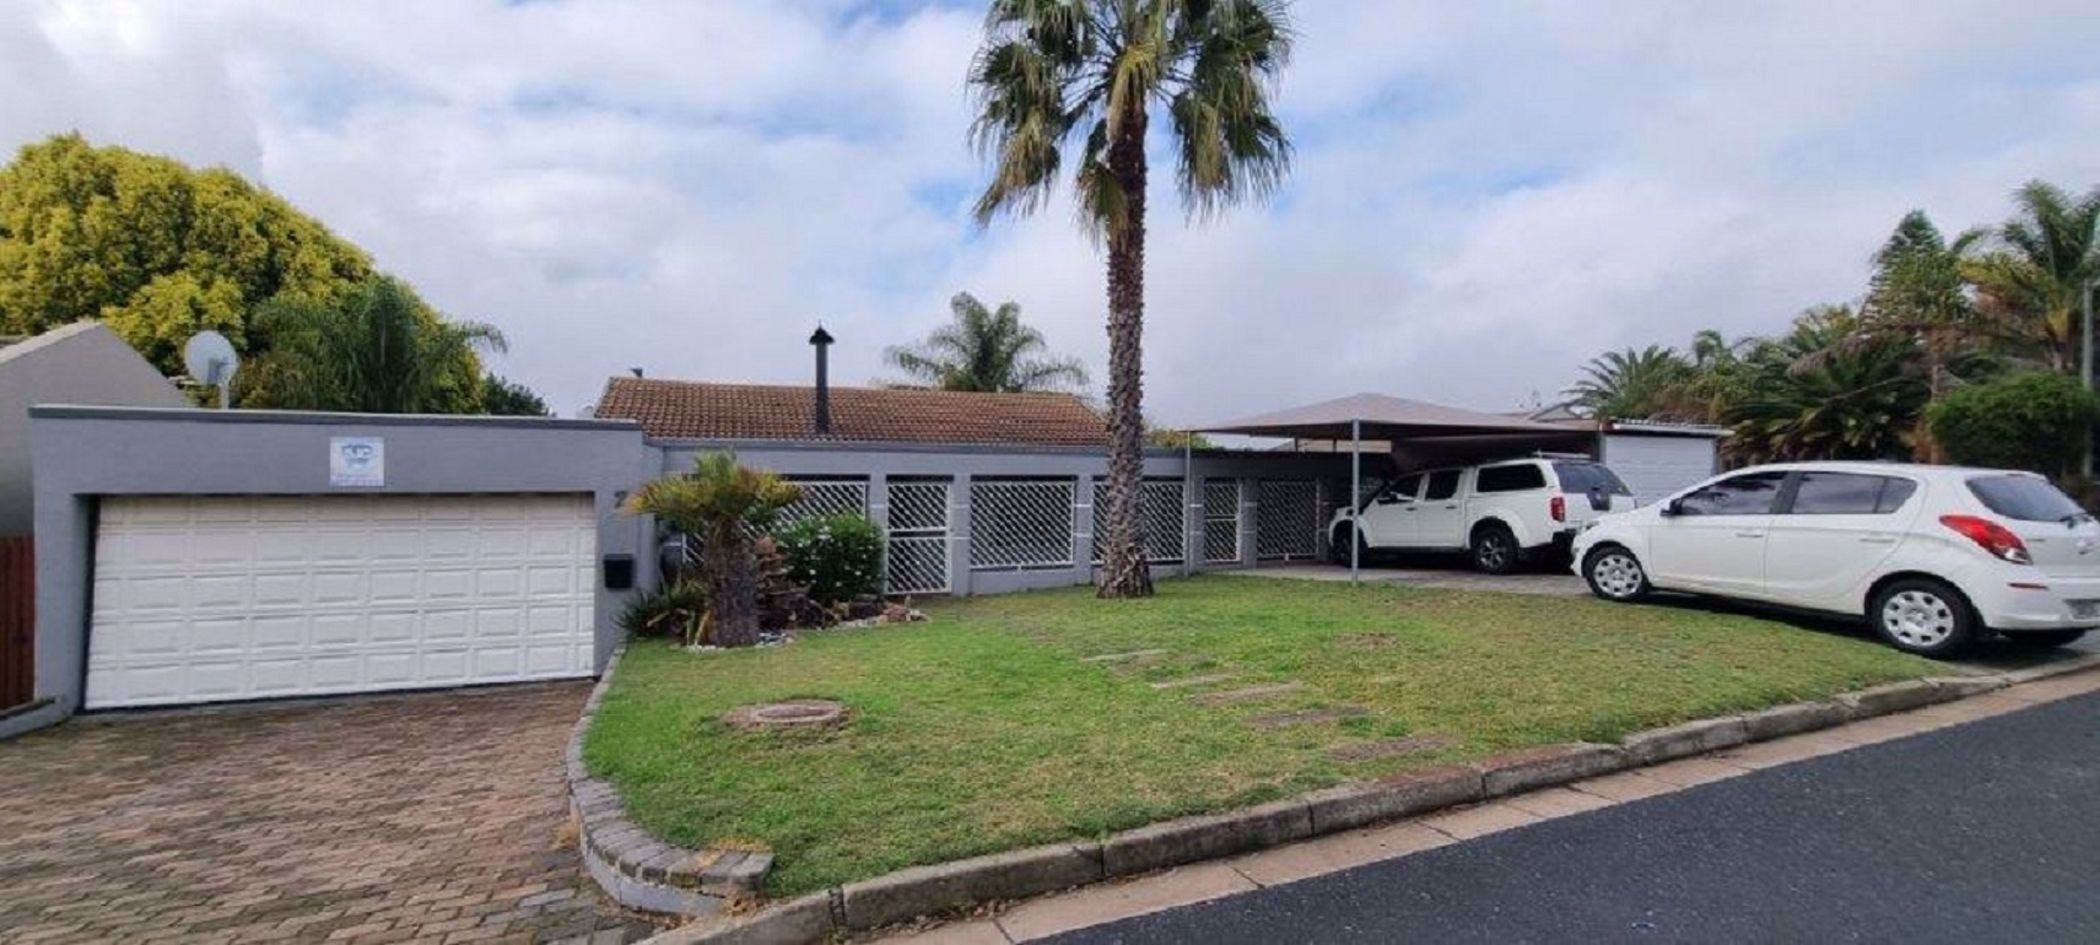 3 bedroom house for sale in Morgenster